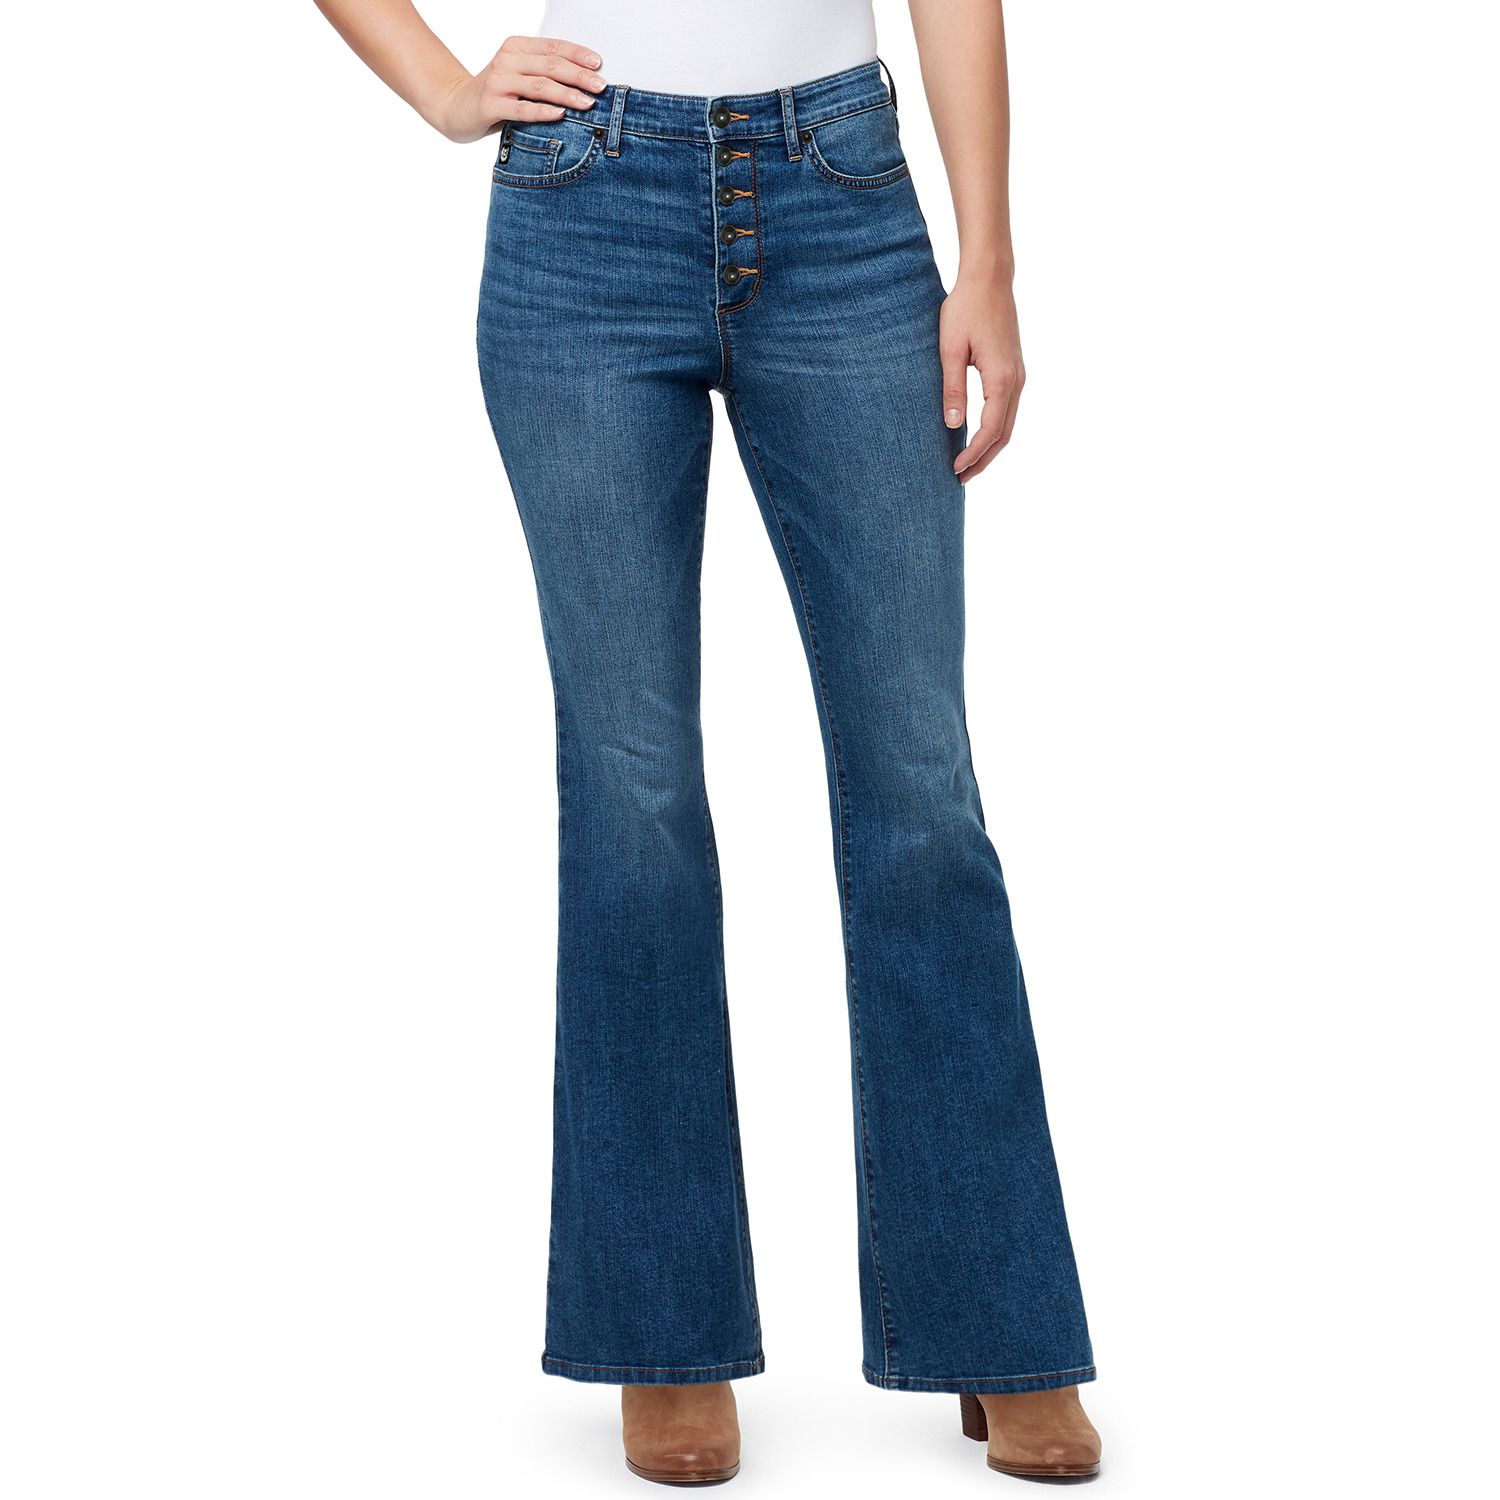 women's high rise button fly jeans